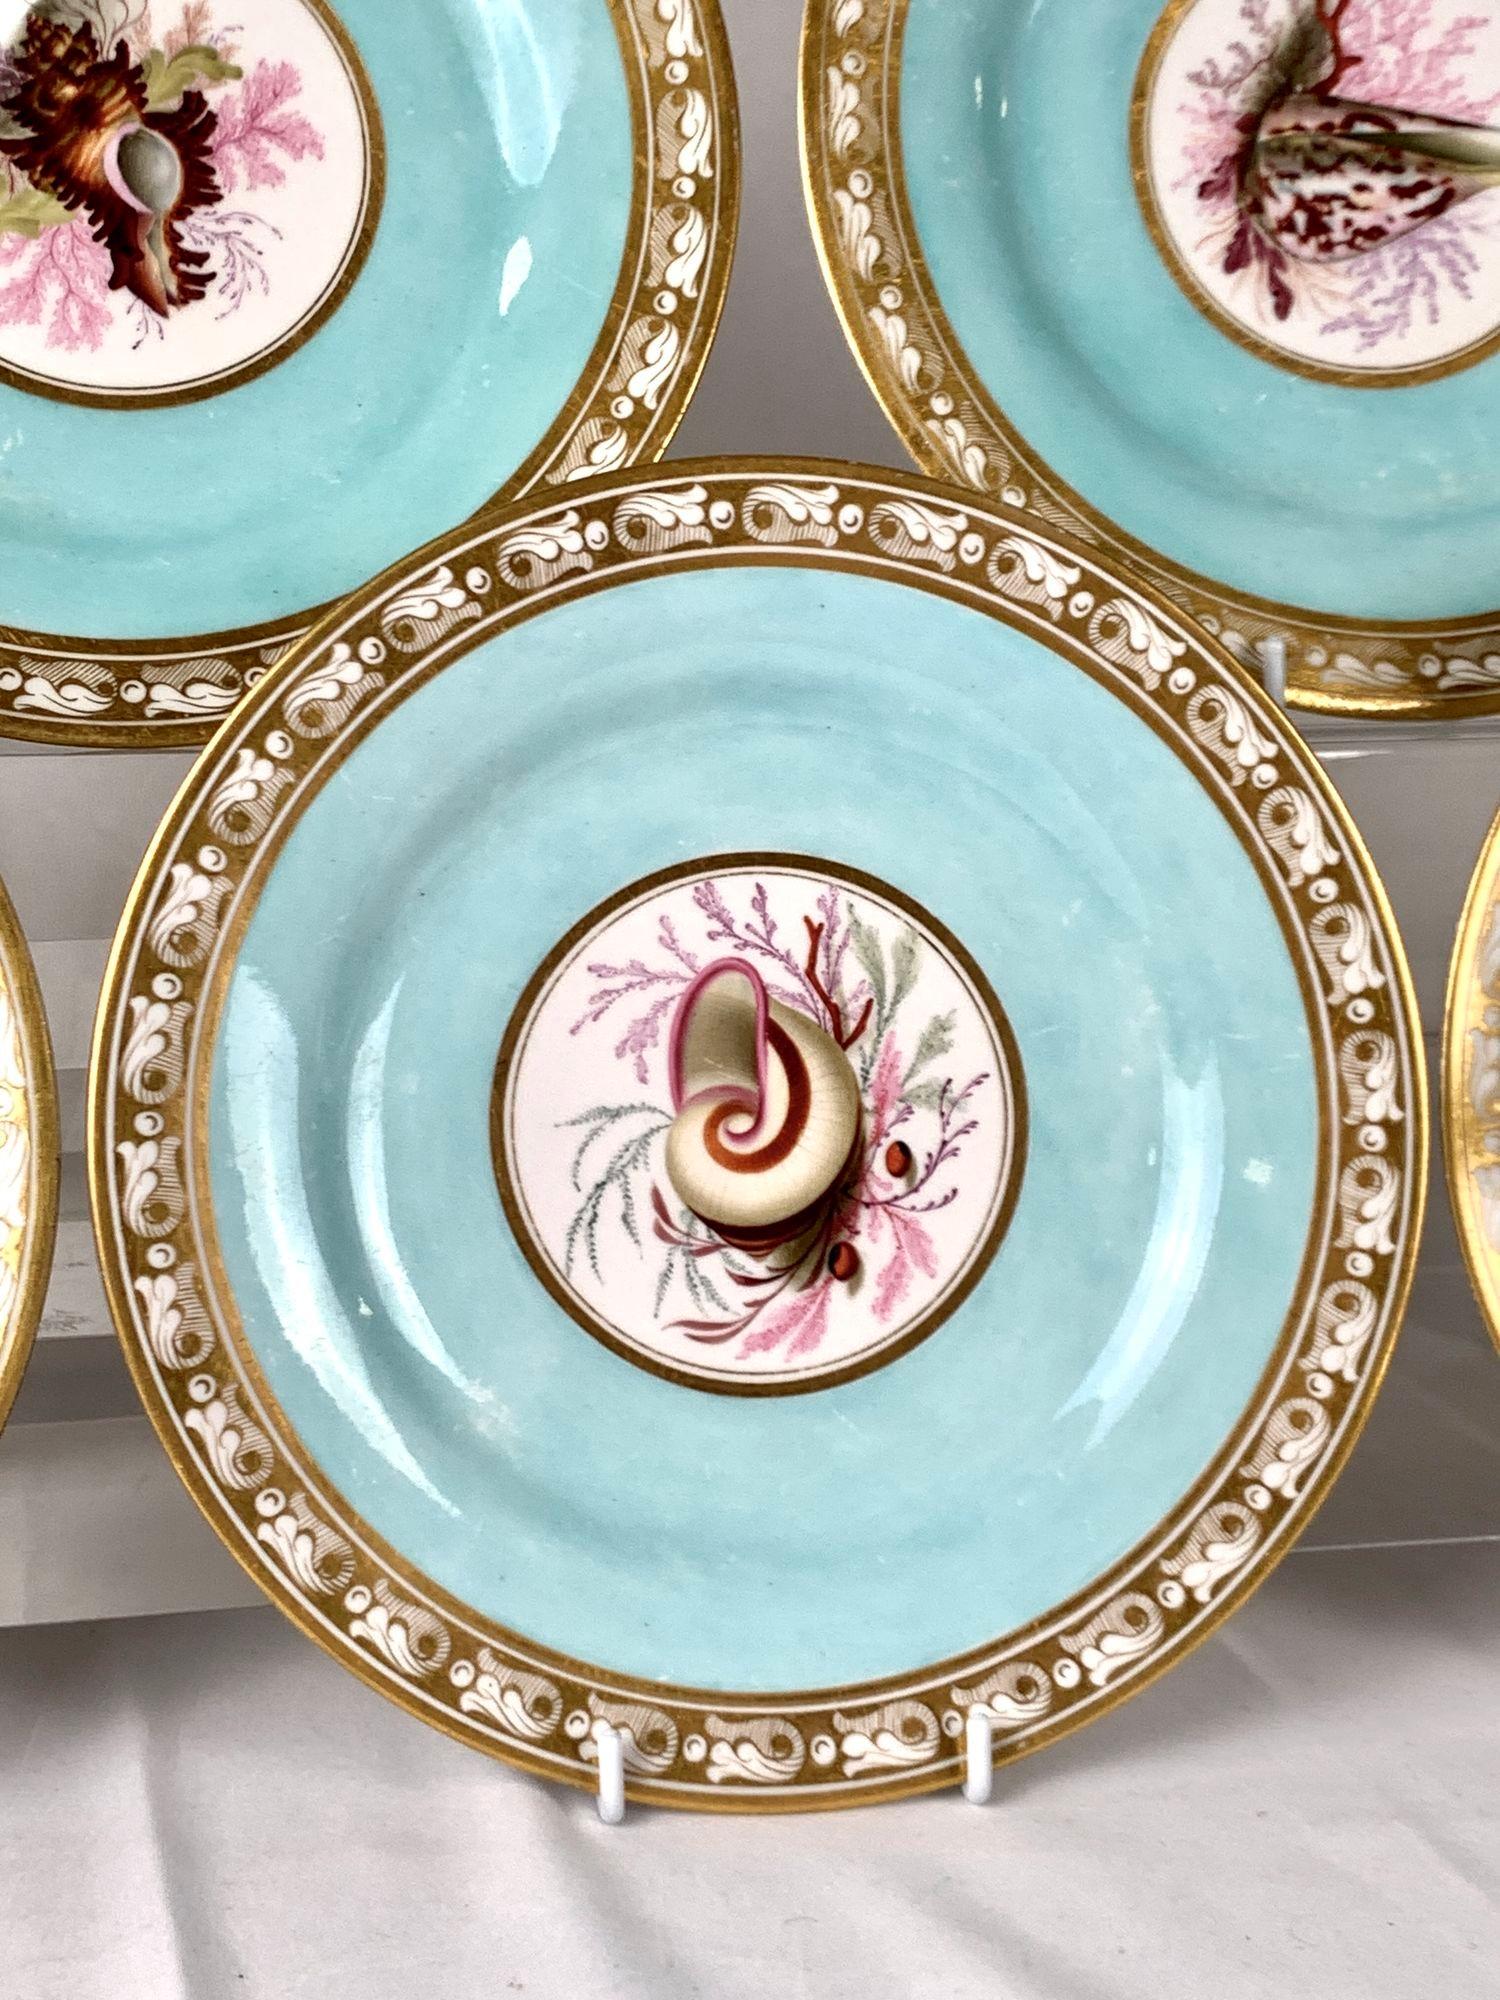 19th Century Hand Painted Shell Decorated Worcester Plates Set of 5 Flight Barr Barr C-1820 For Sale